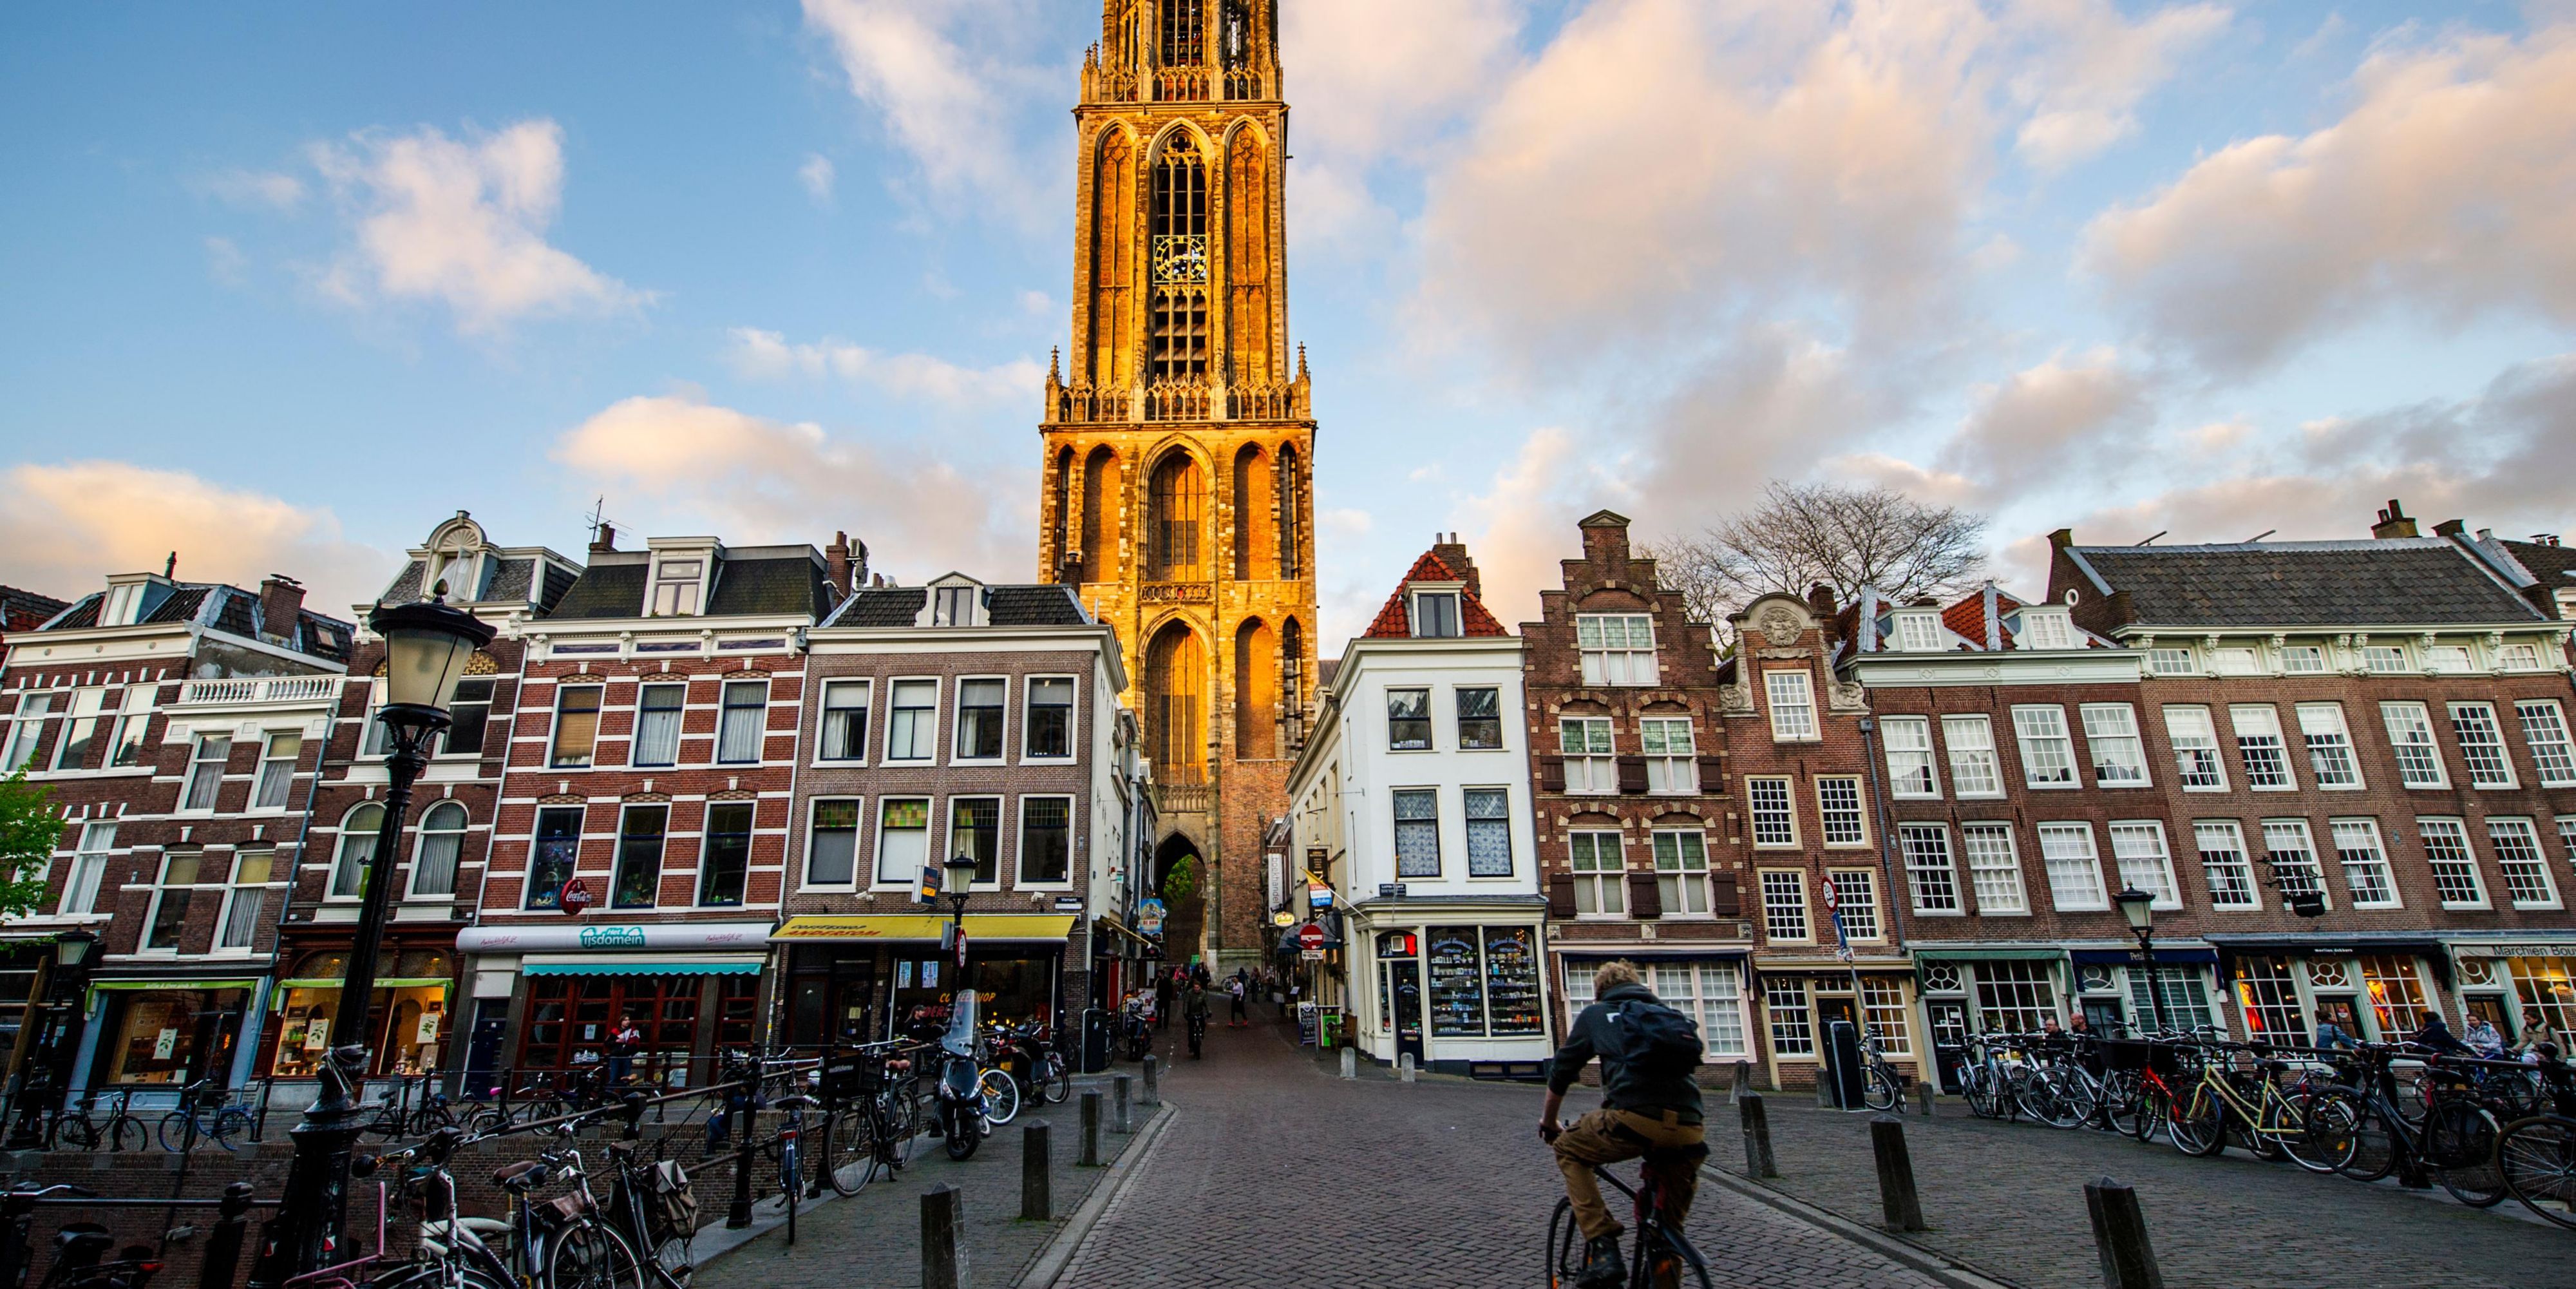 Explore the city of Utrecht like a local in an eco-friendly, active way. Our bikes are available at our reception. To guarantee availablility, please reserve in advance.